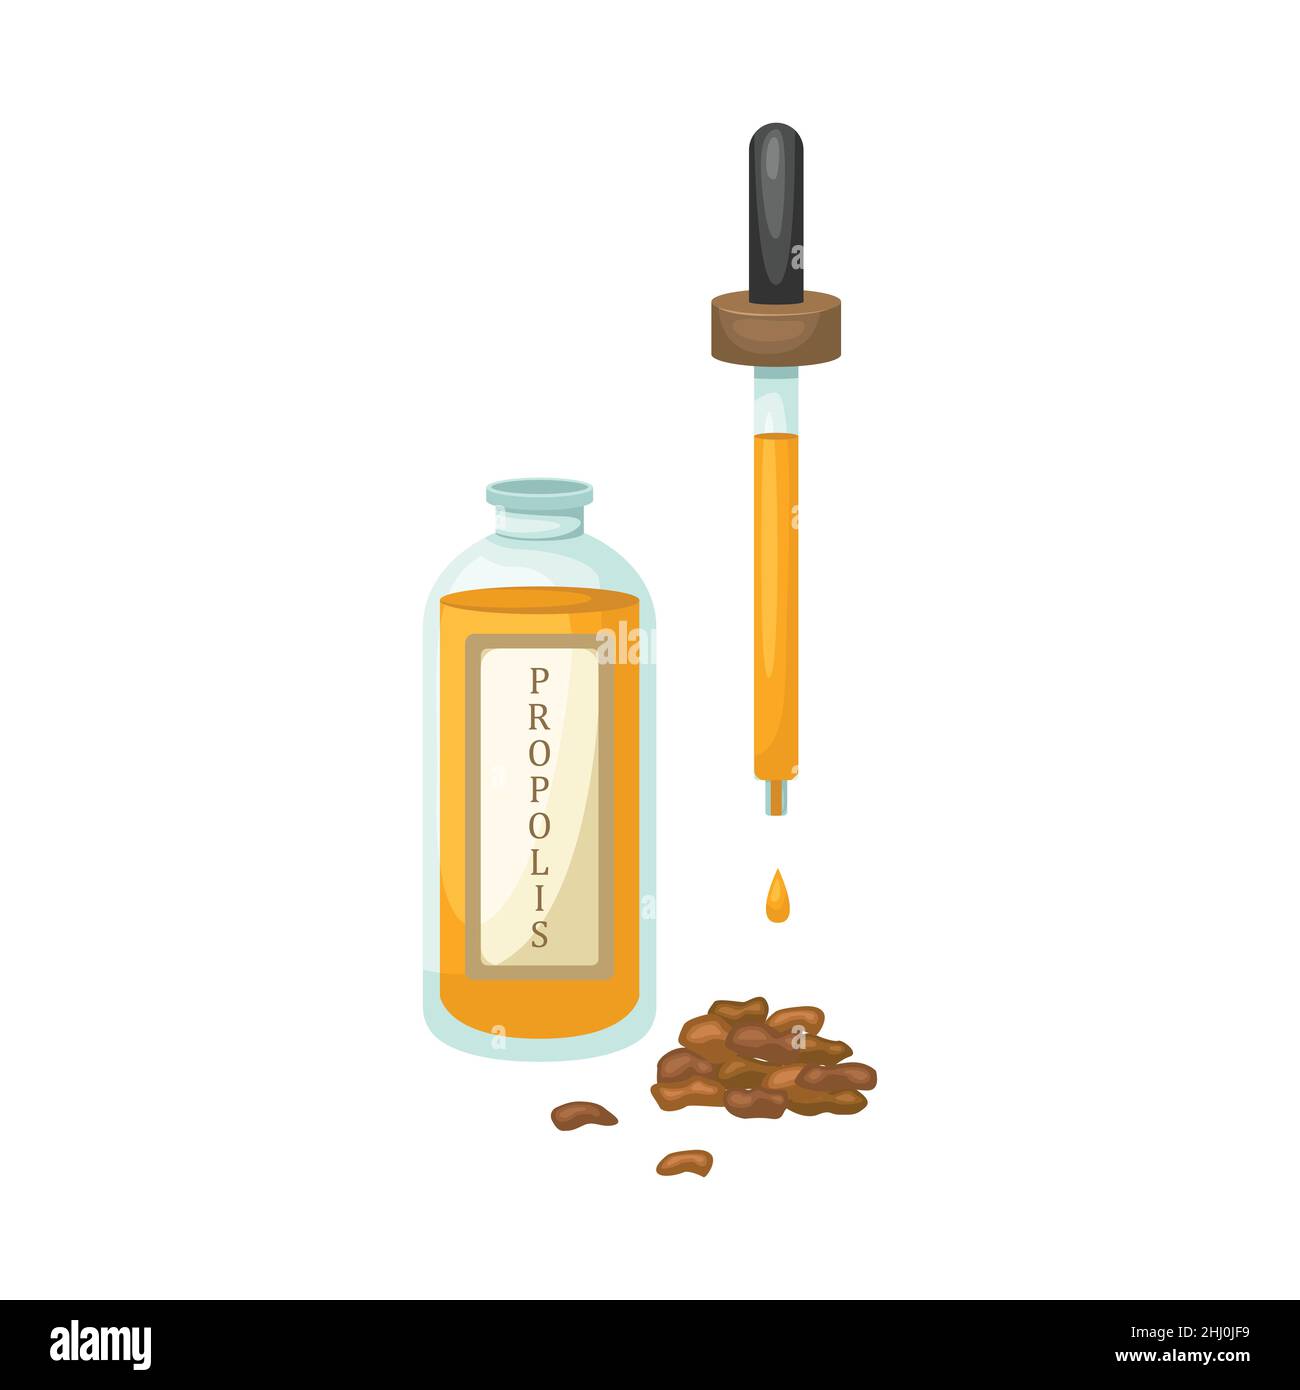 Vector illustration of a bottle with propolis tincture. Biologically active additive. Stock Vector